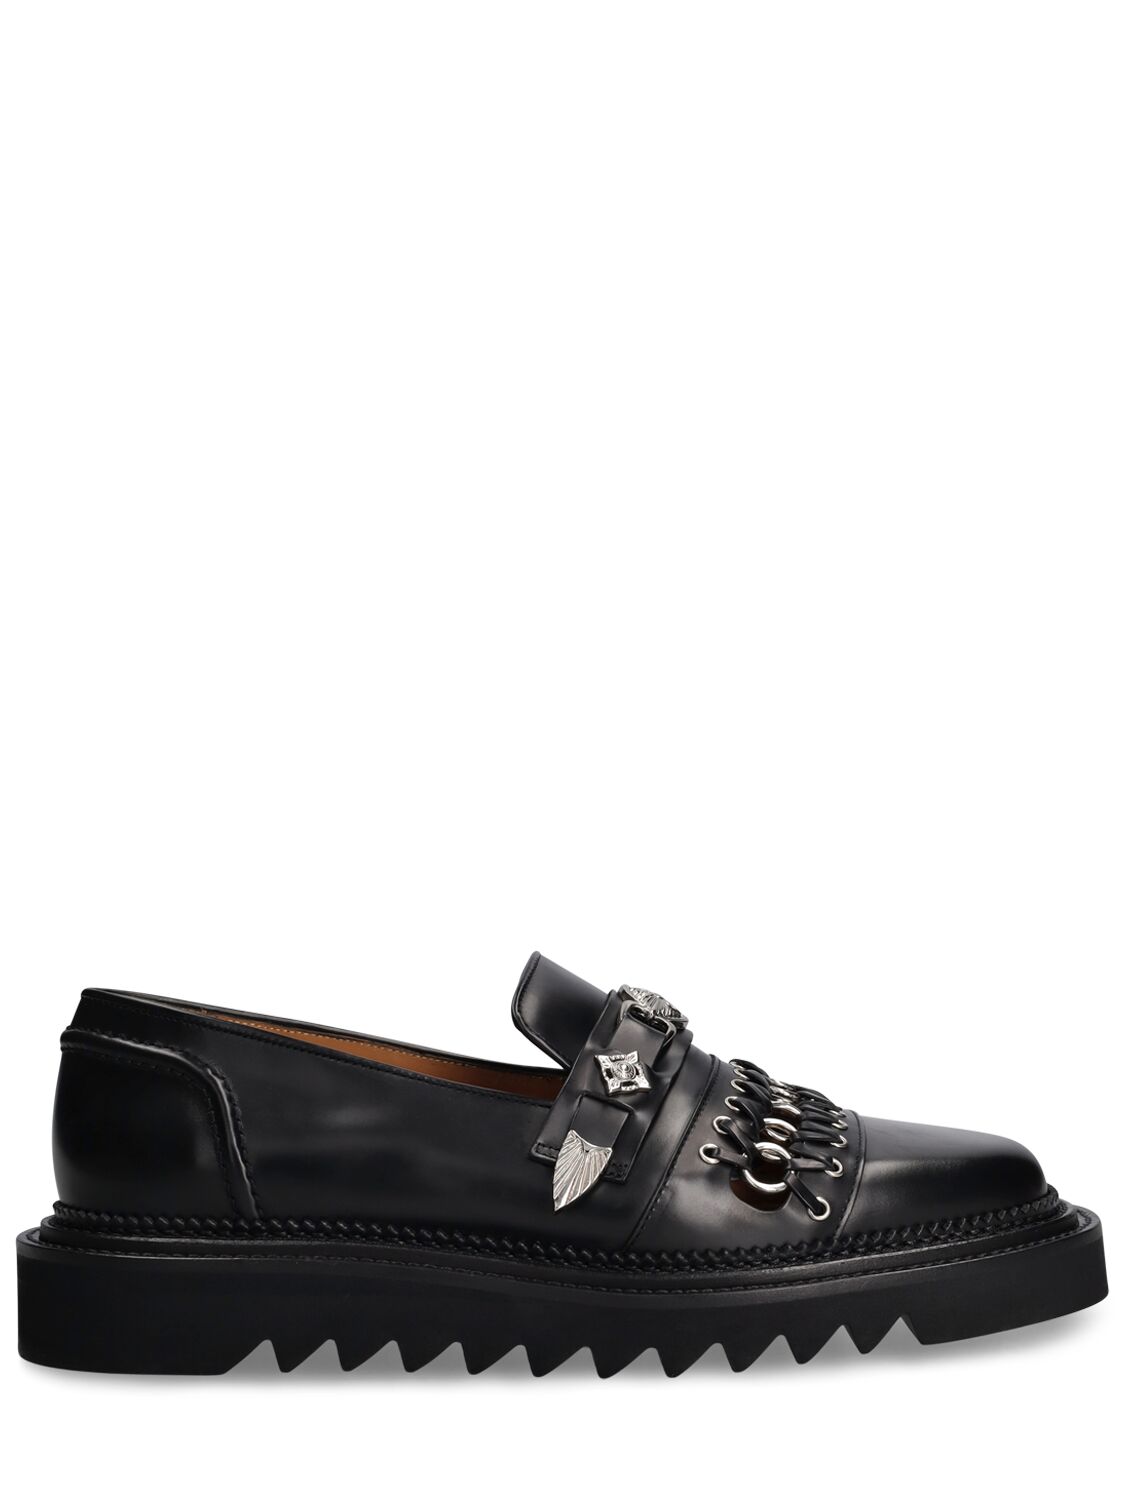 Image of Black Leather Loafers